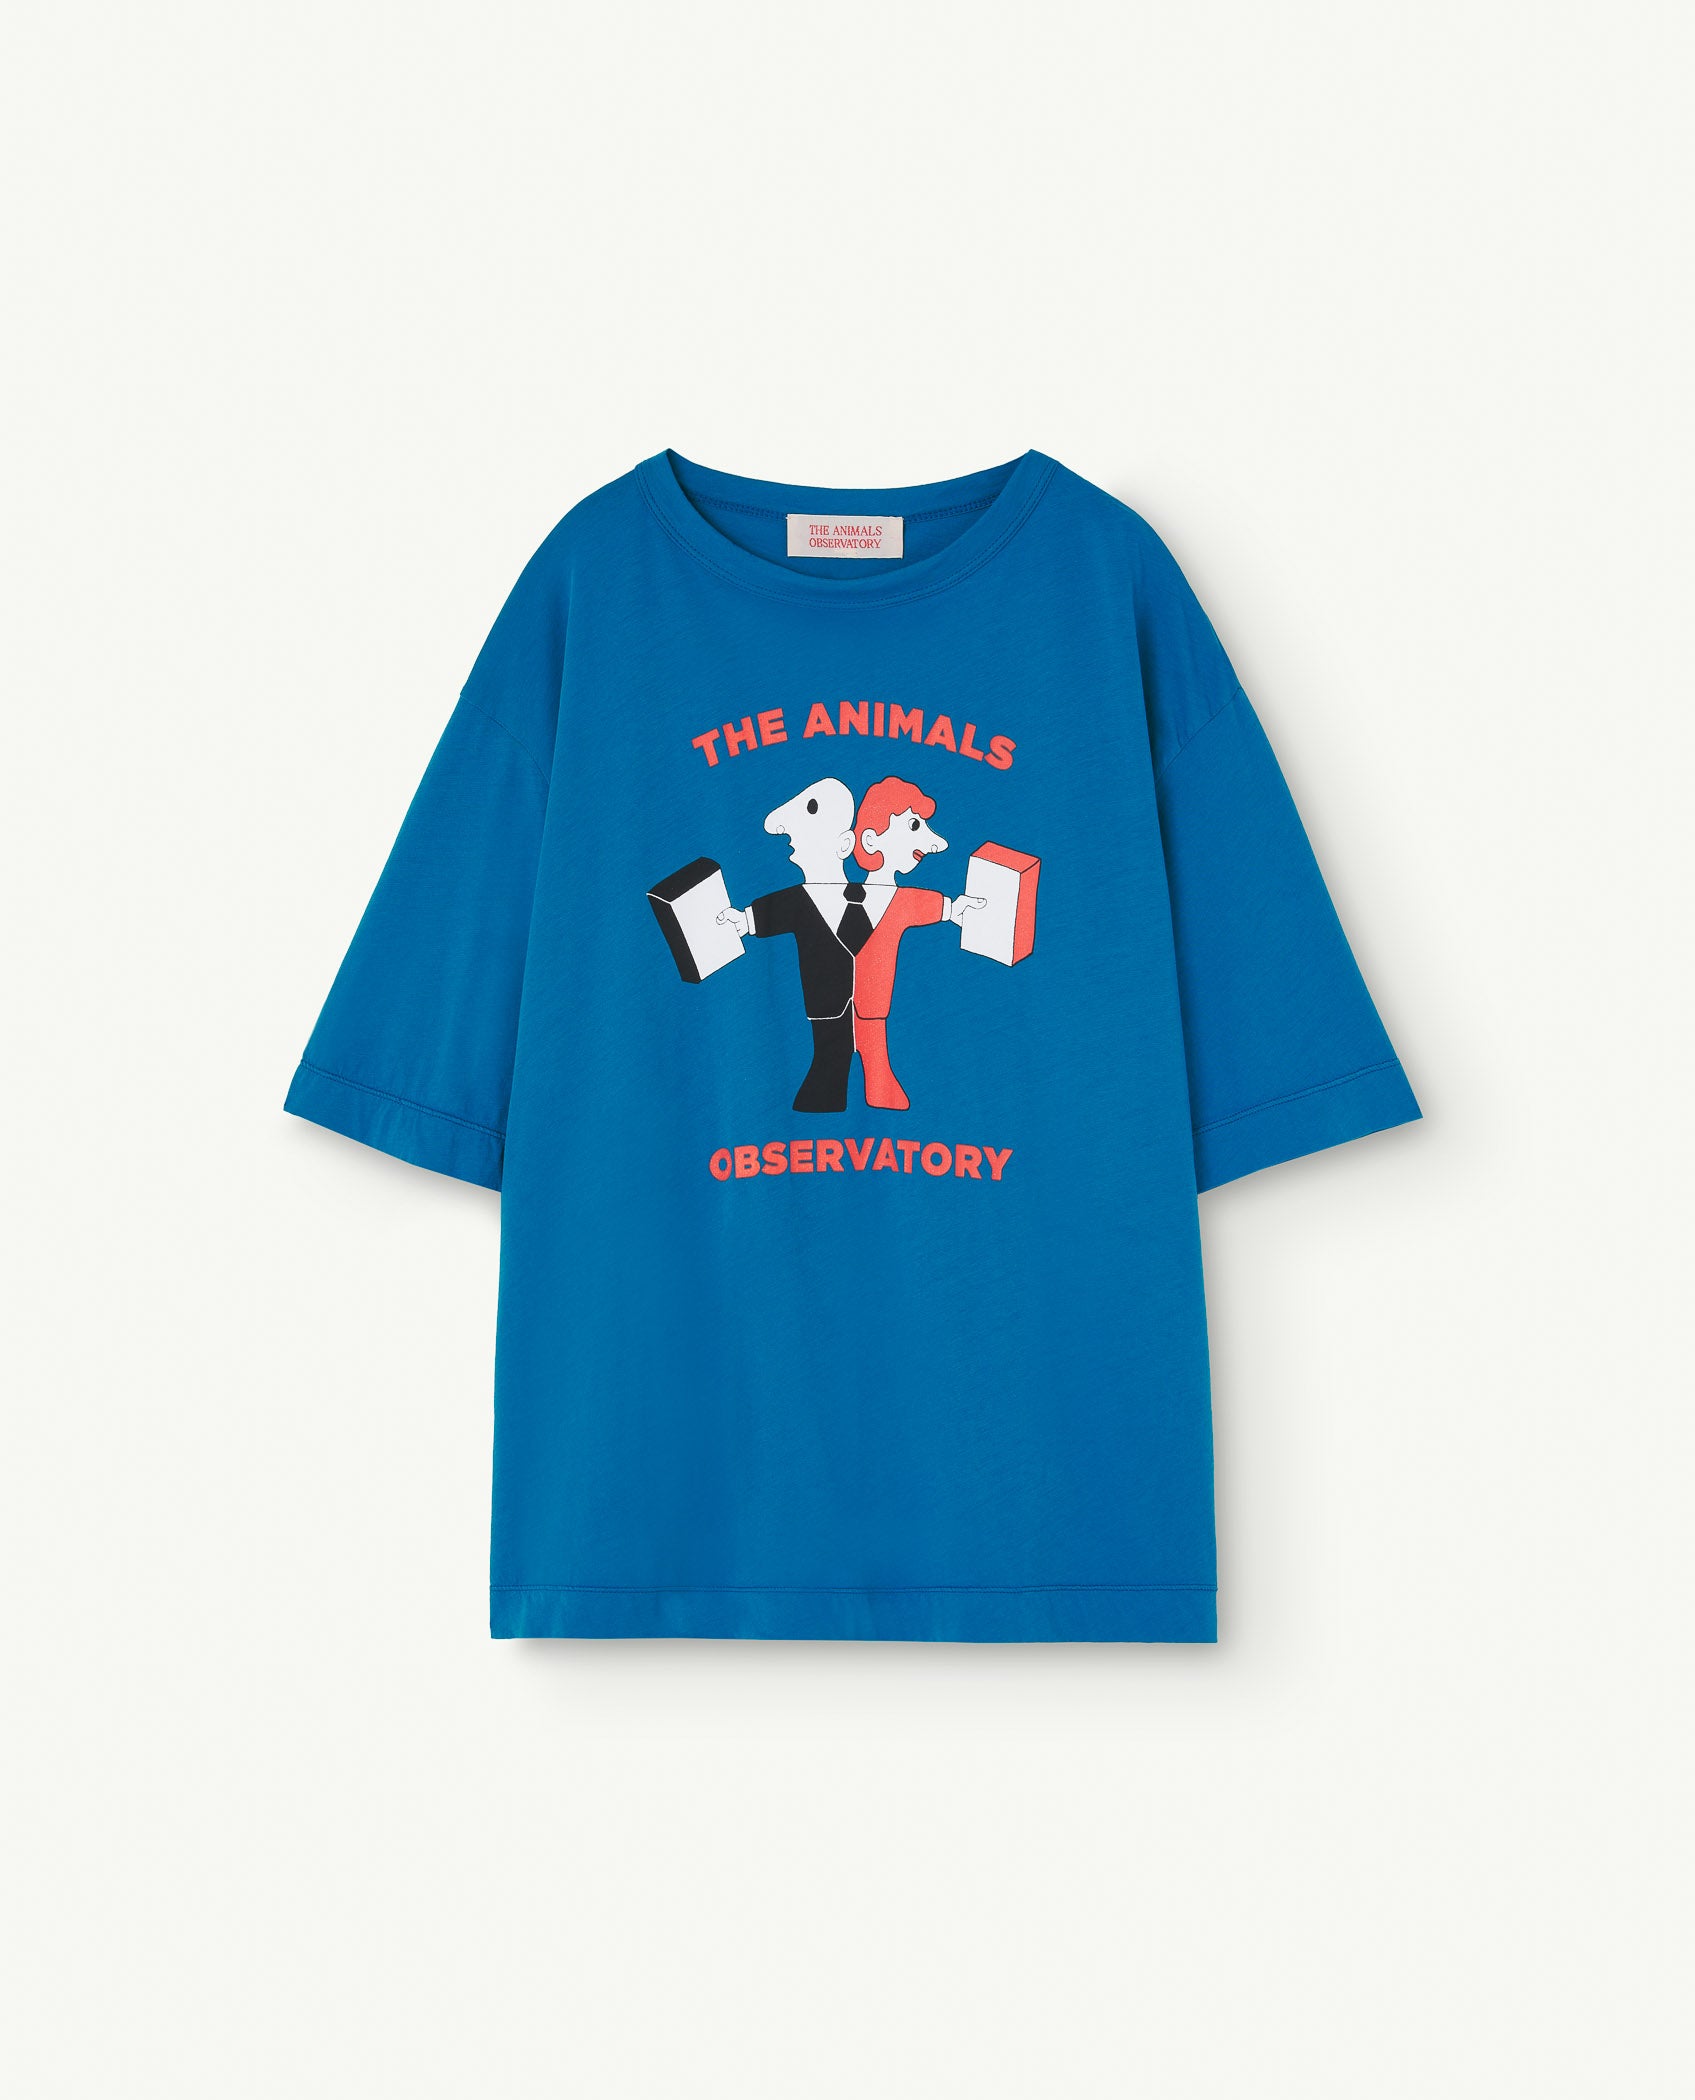 The Animals Observatory - rooster - oversized kids t-shirt - blue